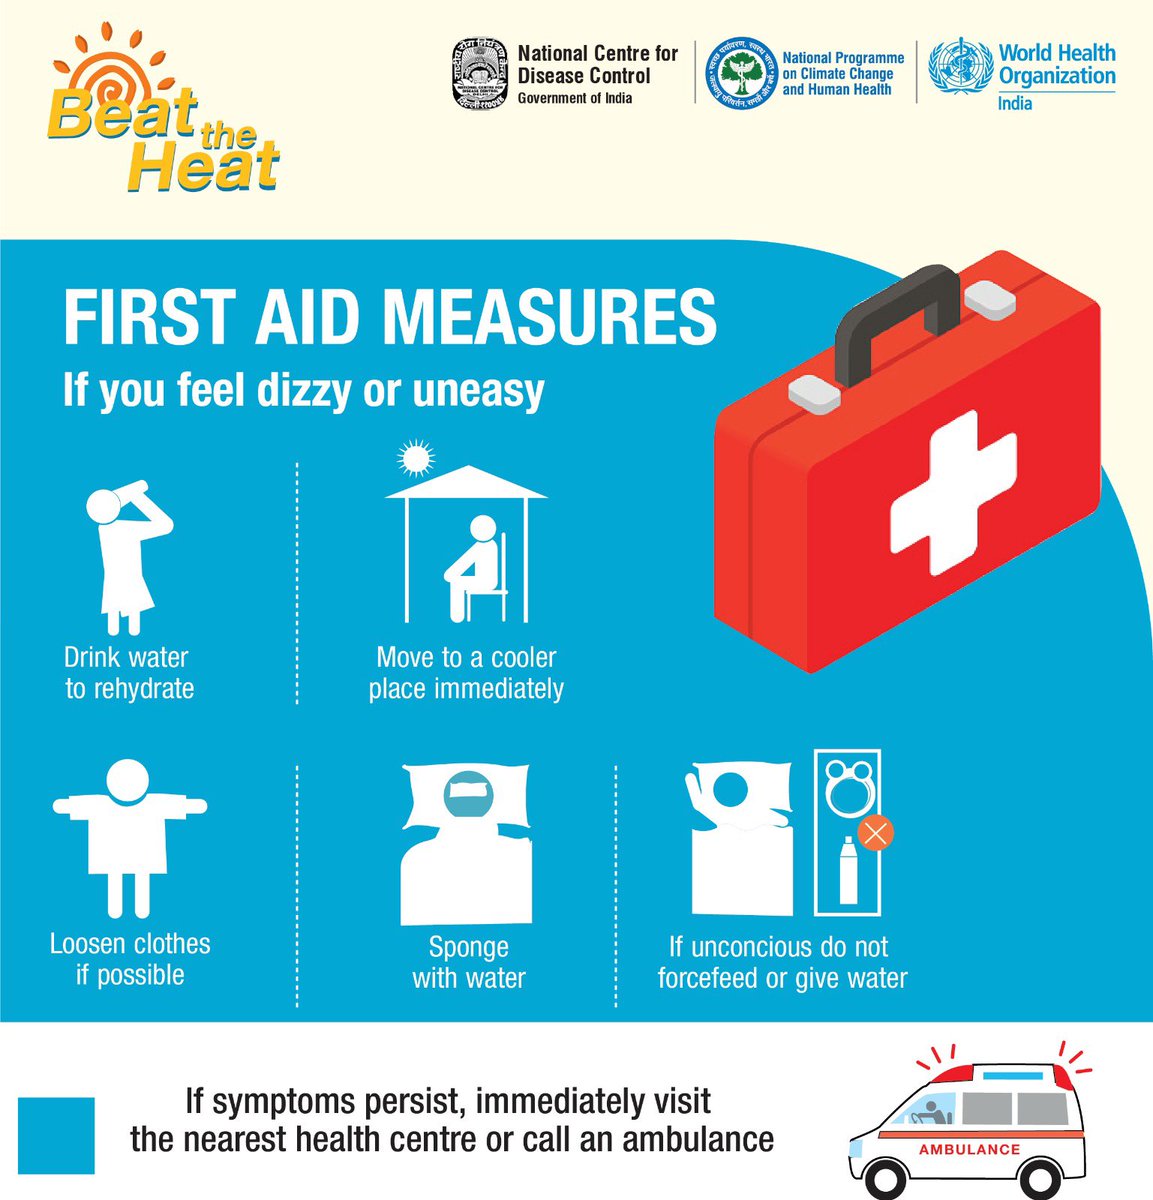 Heatwaves are here, but we can be prepared! Be heatwave-ready with these first-aid tips. Stay hydrated, seek shade, and recognise signs of heat-related illnesses. Let's take care of each other during these sizzling days! #HeatWave #StaySafe #BeatTheHeat